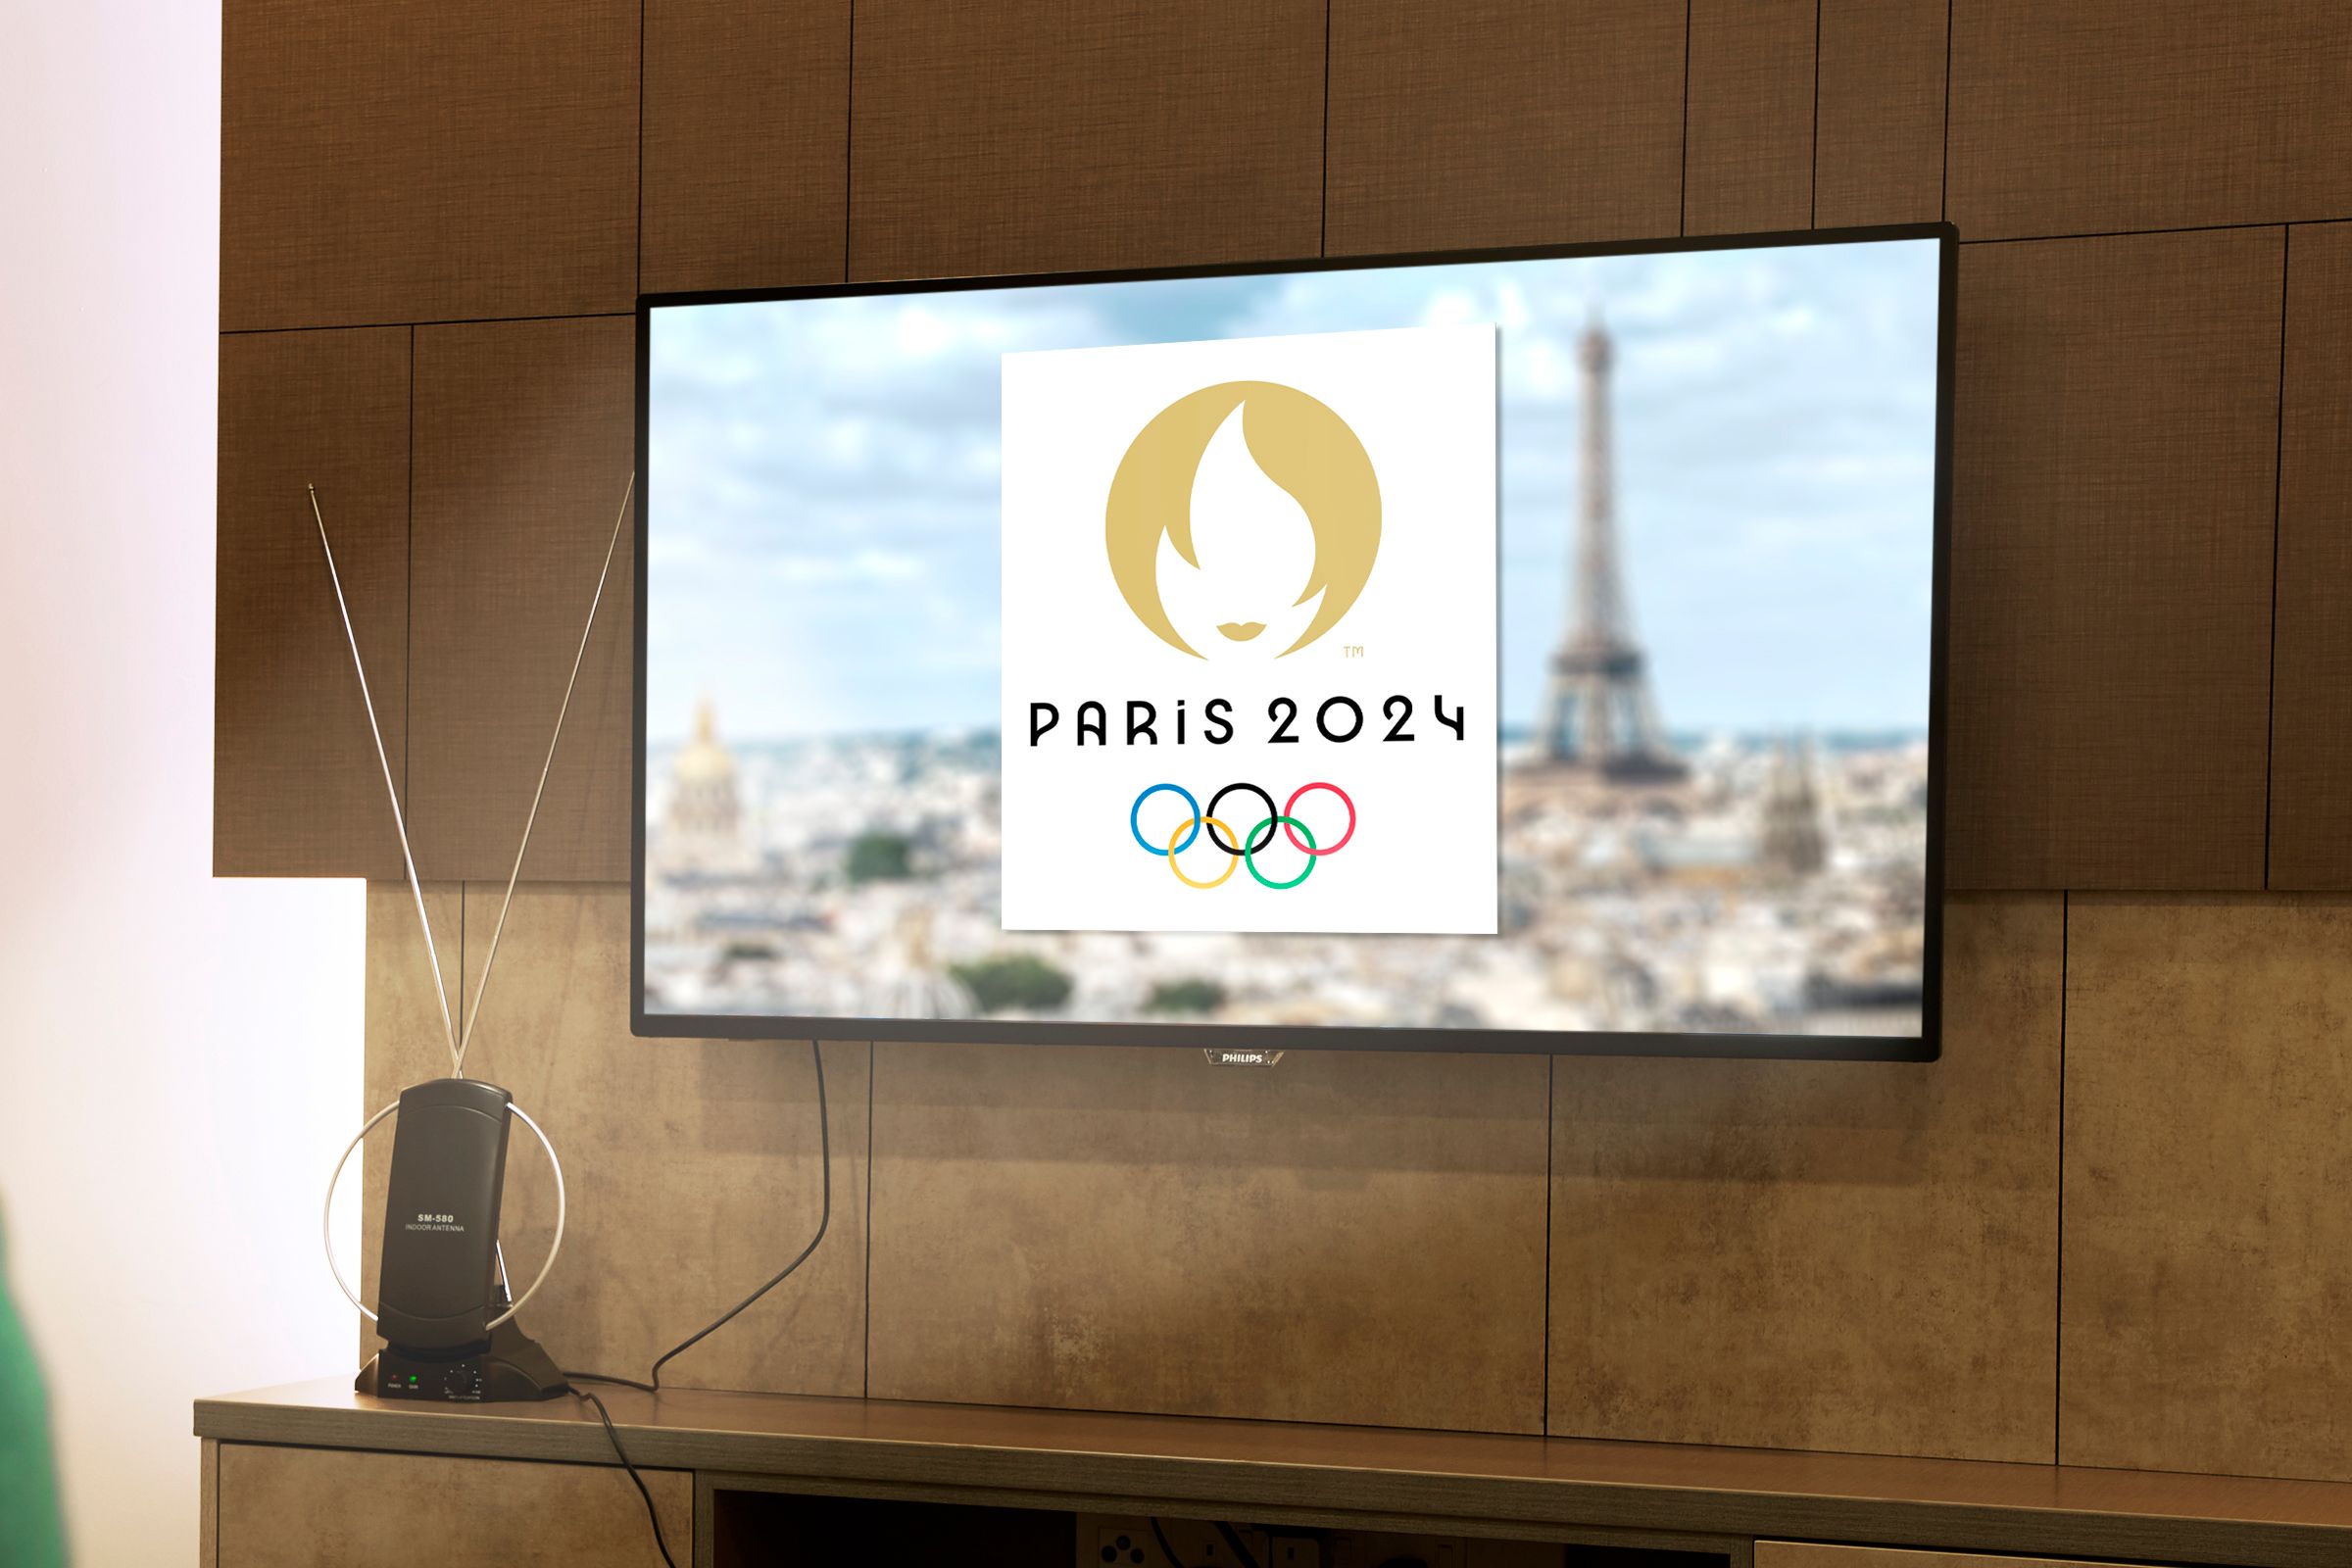 A panel with a TV displaying an image of the 2024 Paris Olympics, and an antenna on the shelf.